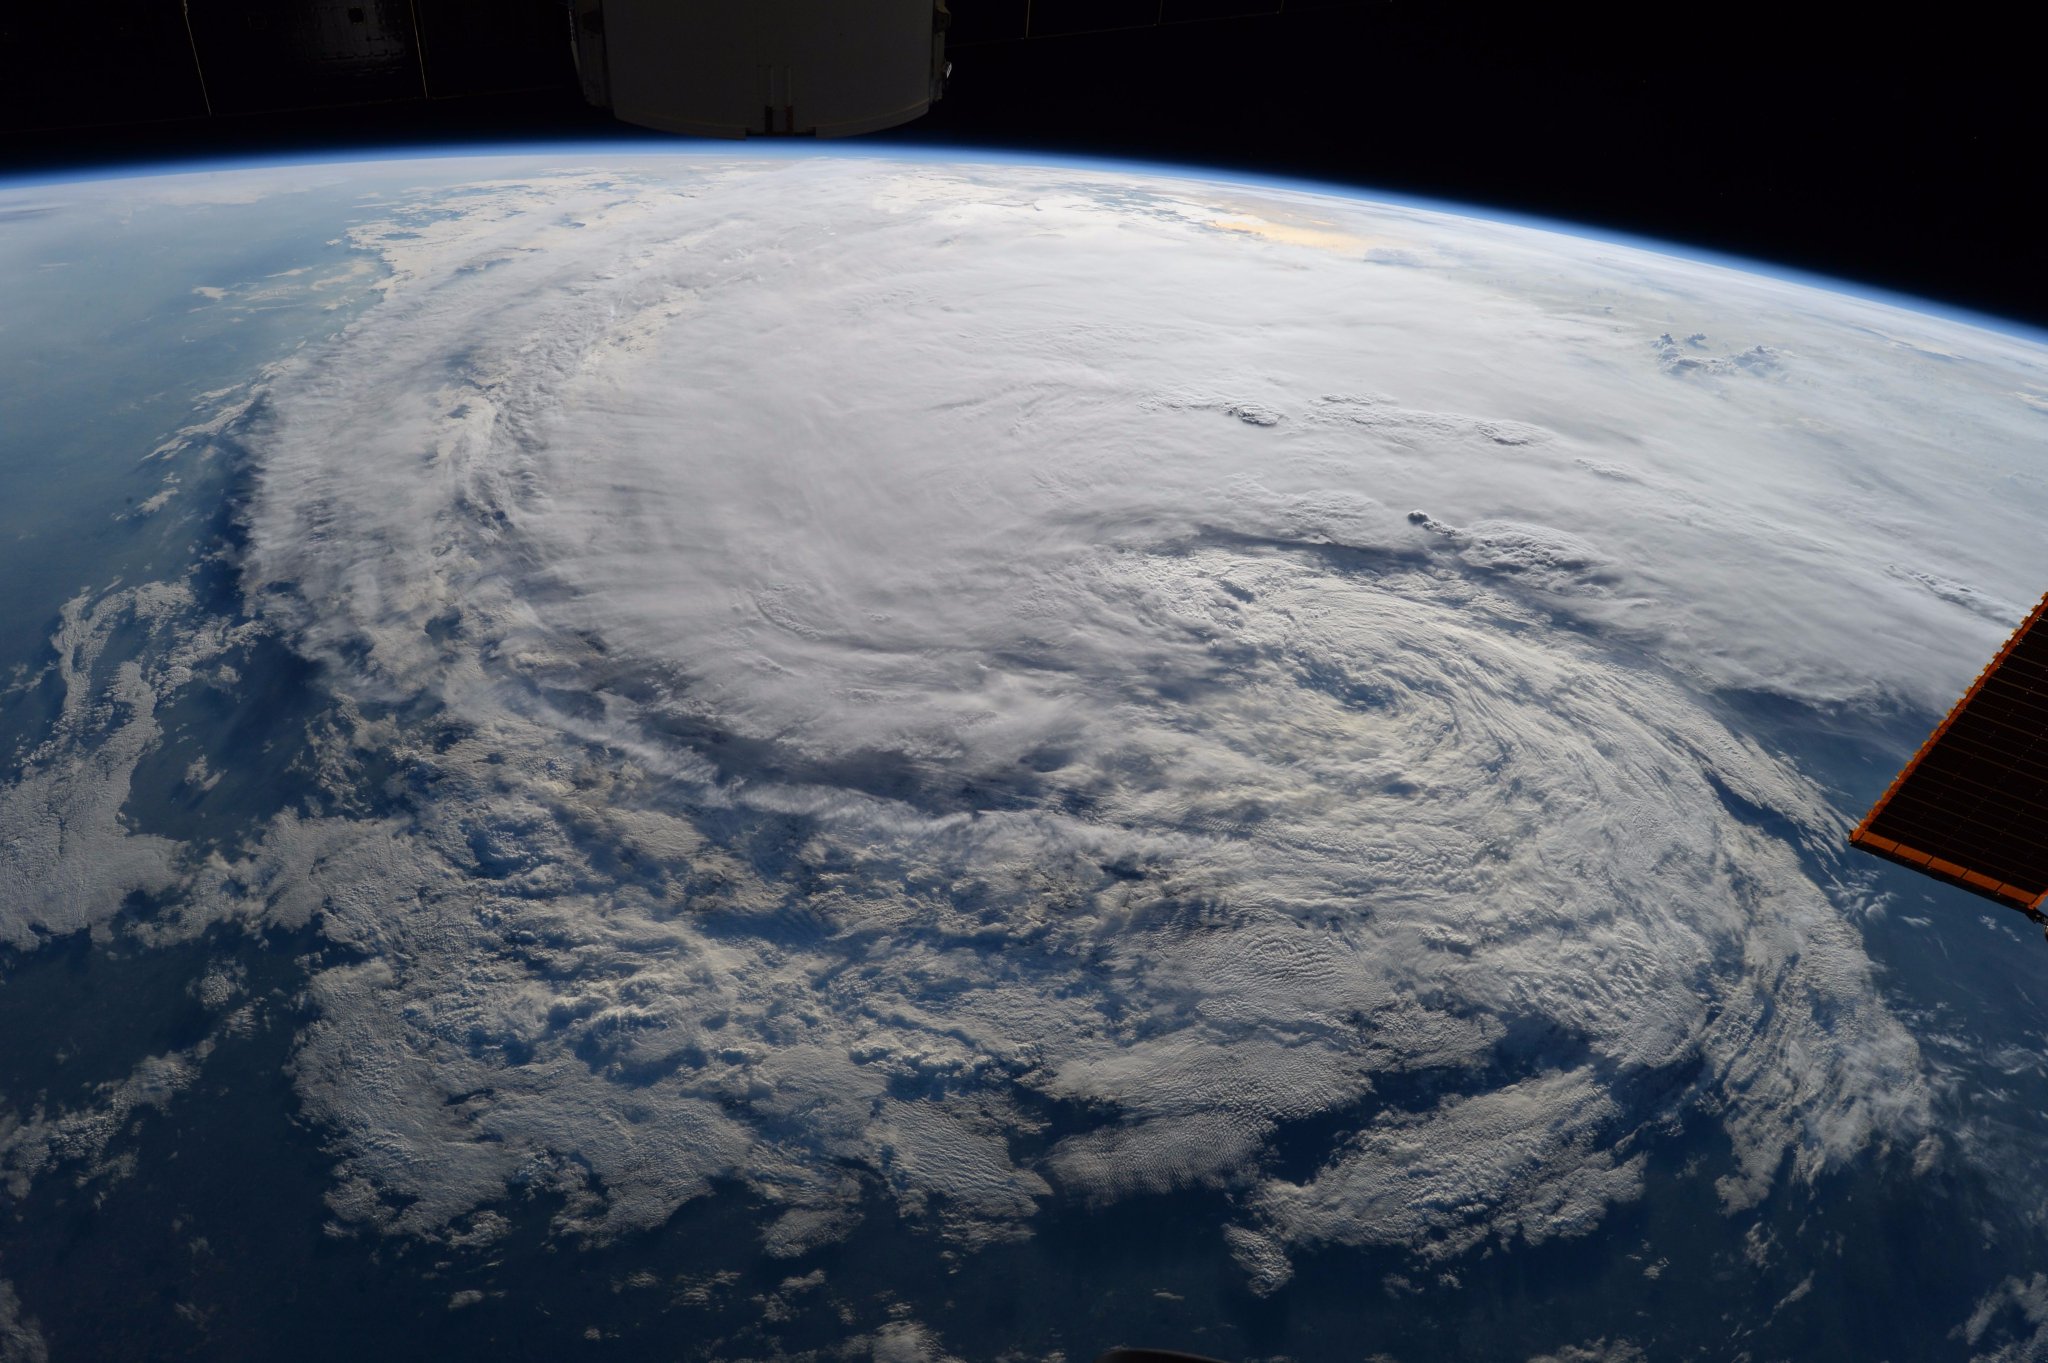 Harvey seen from the ISS, a huge swirling cloud mass seen from an oblique angle.